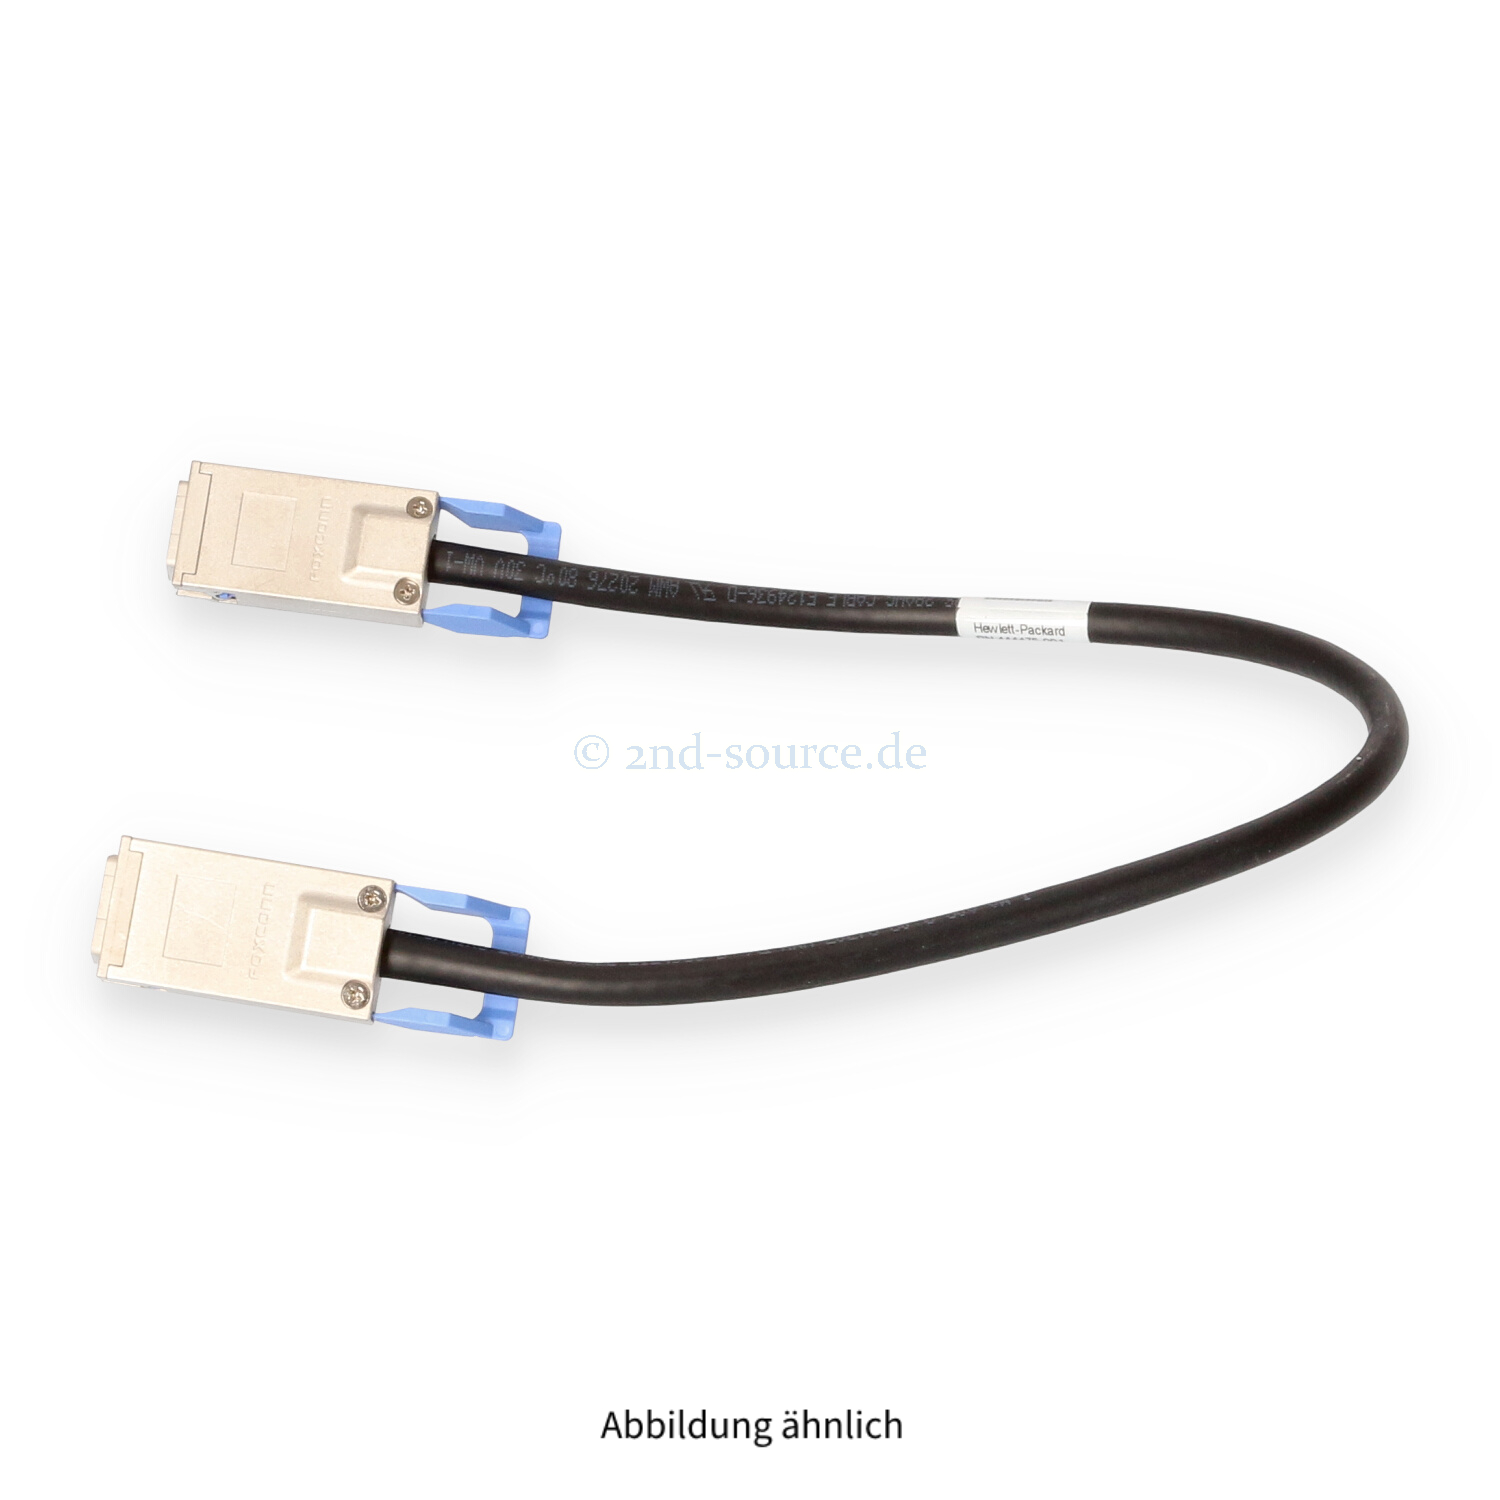 HPE 0.50m CX4 10GbE SFF-8470 to CX4 10GbE SFF-8470 InfiniBand Cable 444477-B21 444475-001 446052-001